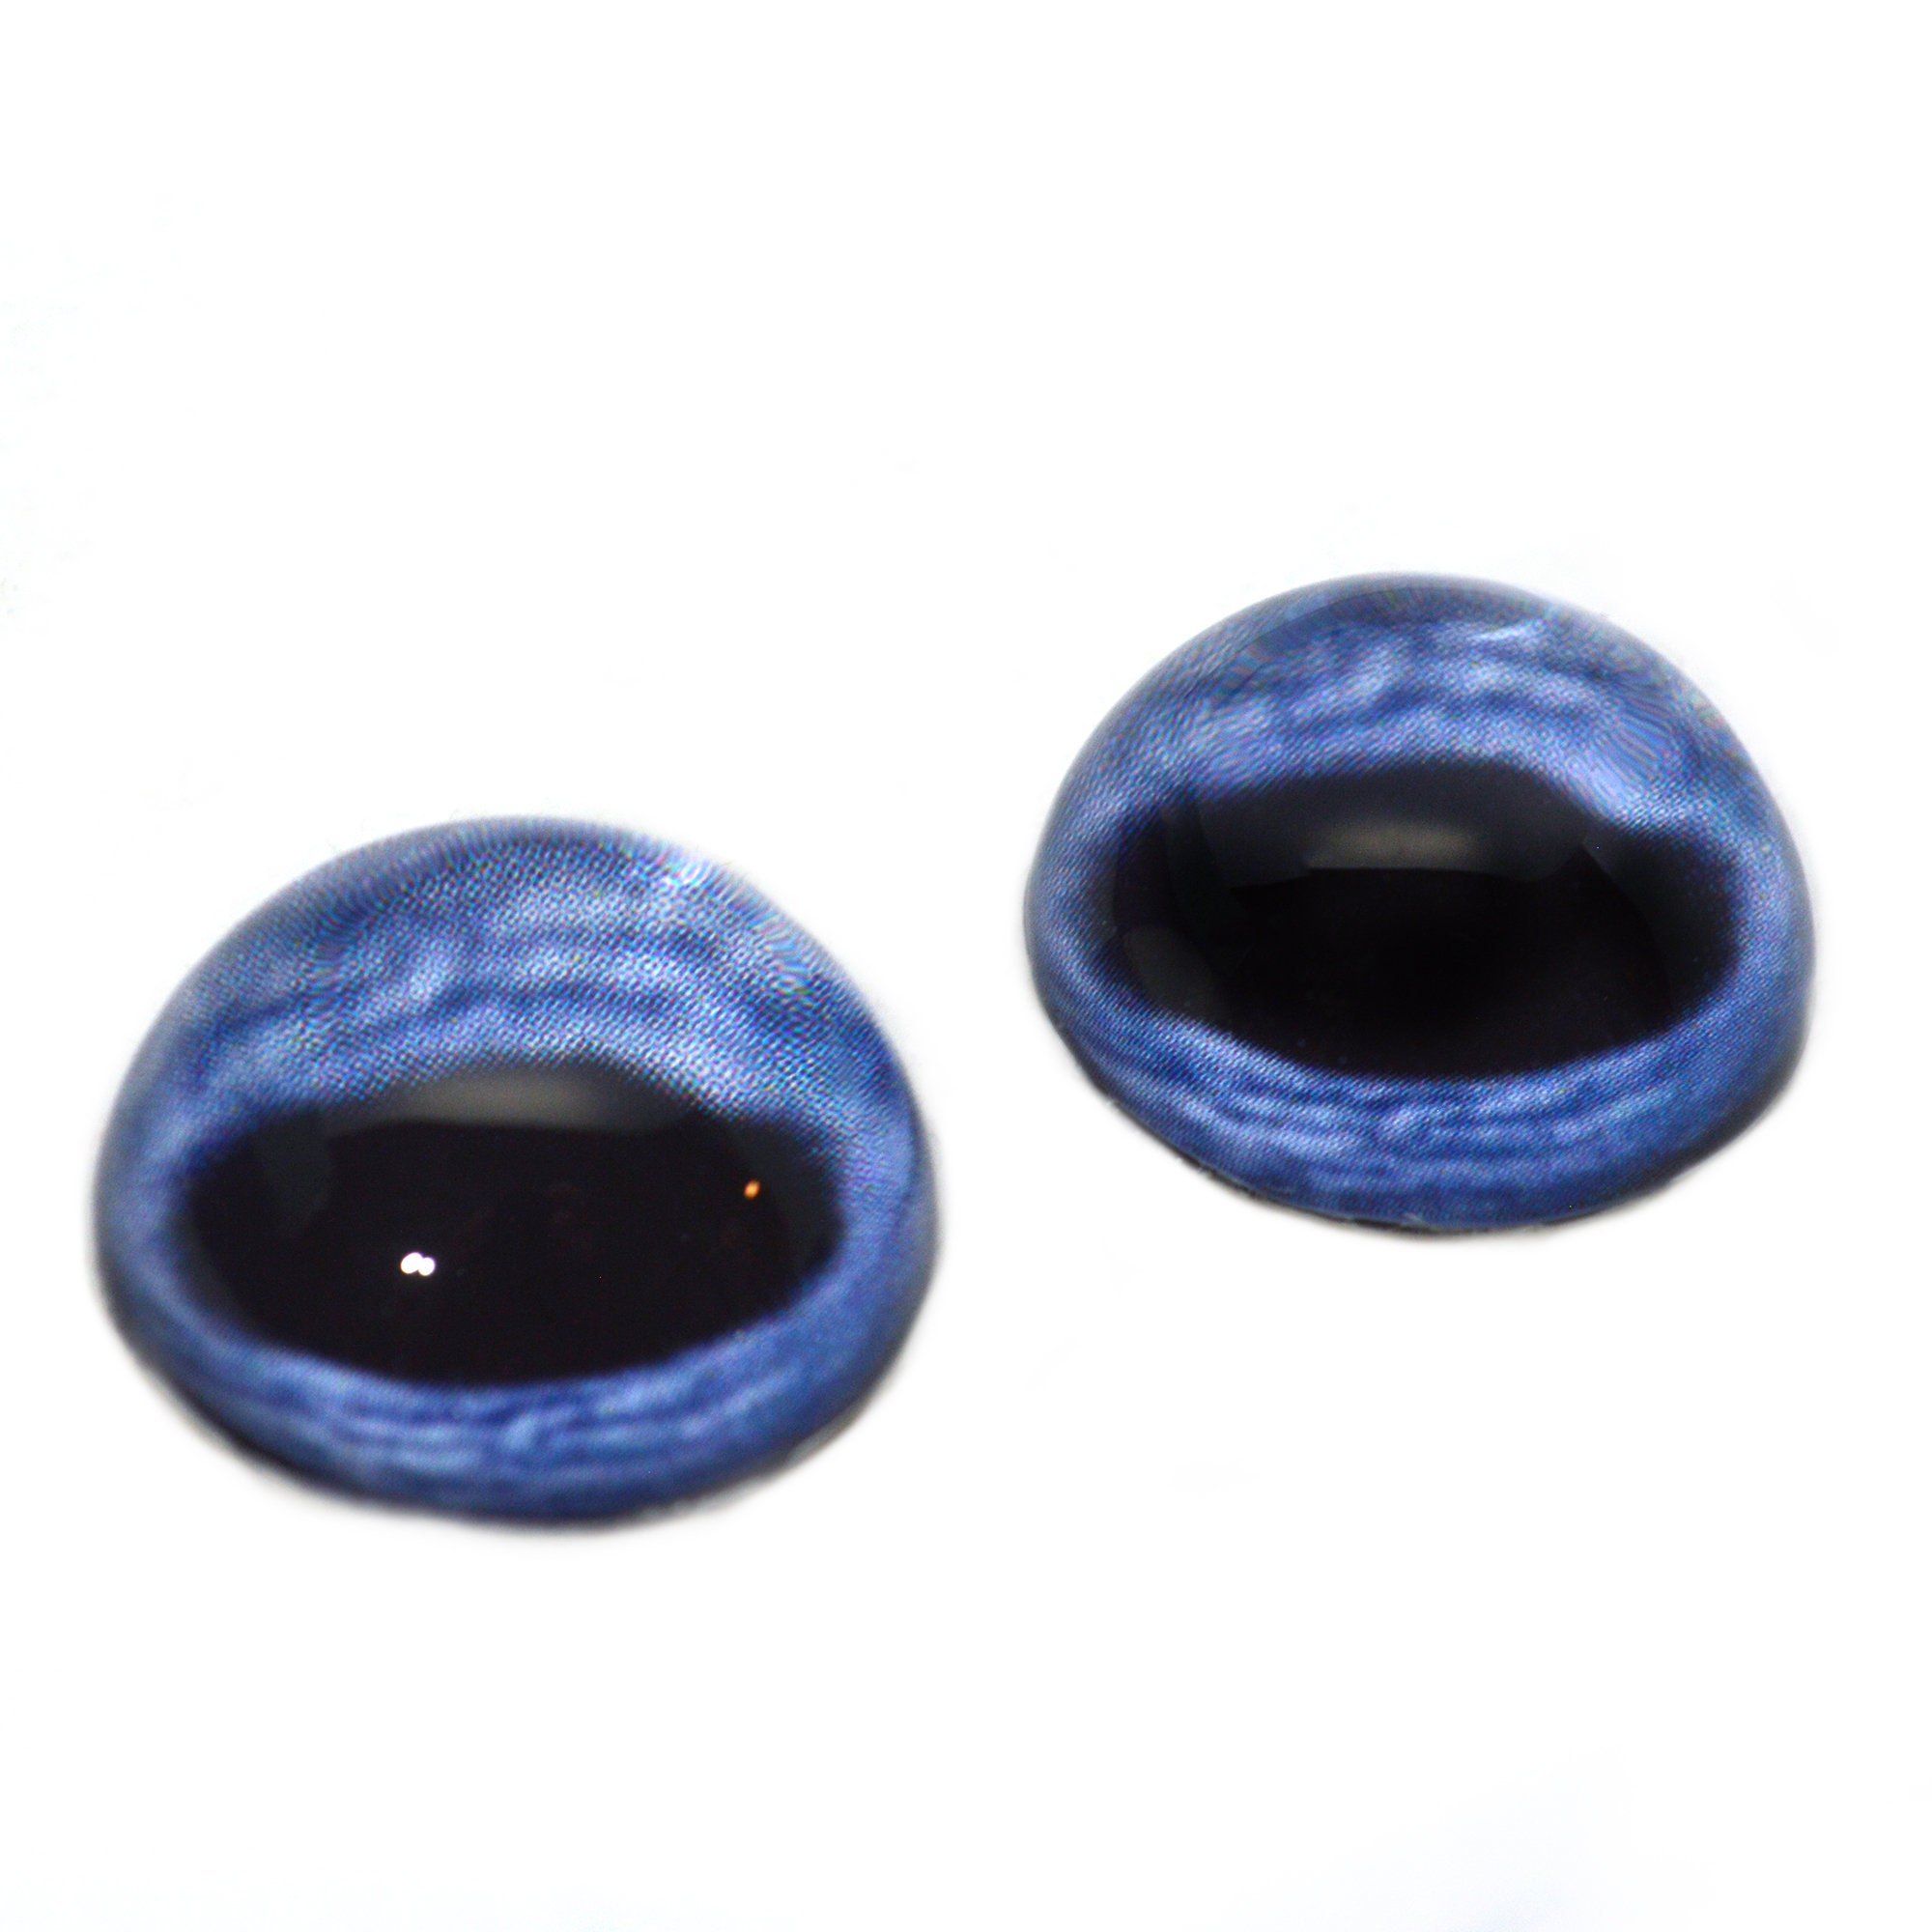 Side Glance Blue Human Glass Eyes 6mm to 60mm Jewelry Making Art Doll Parts  Taxidermy Sculpture Bloodshot Eyeball Flatback Domed Cabochons 